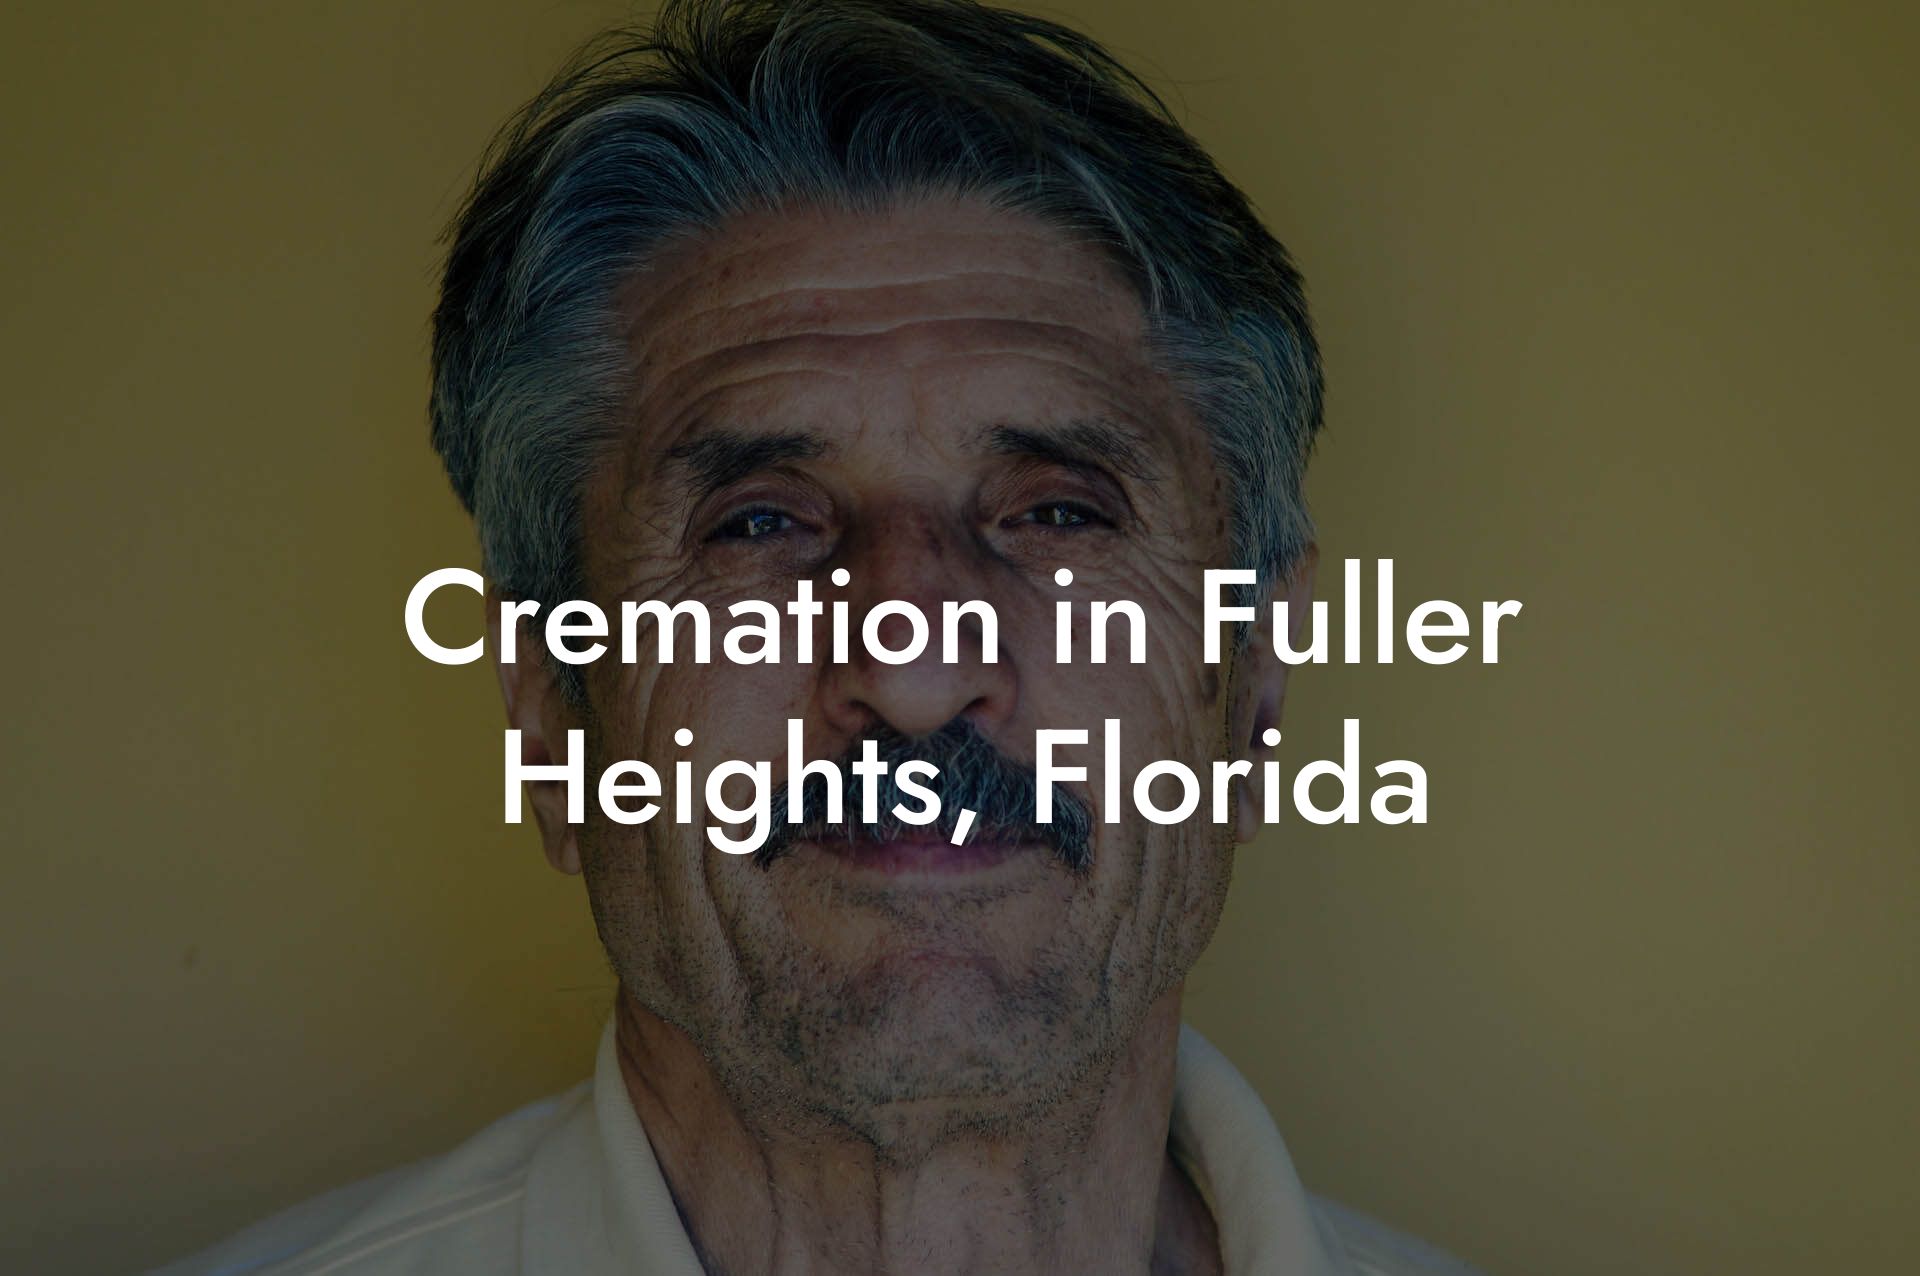 Cremation in Fuller Heights, Florida